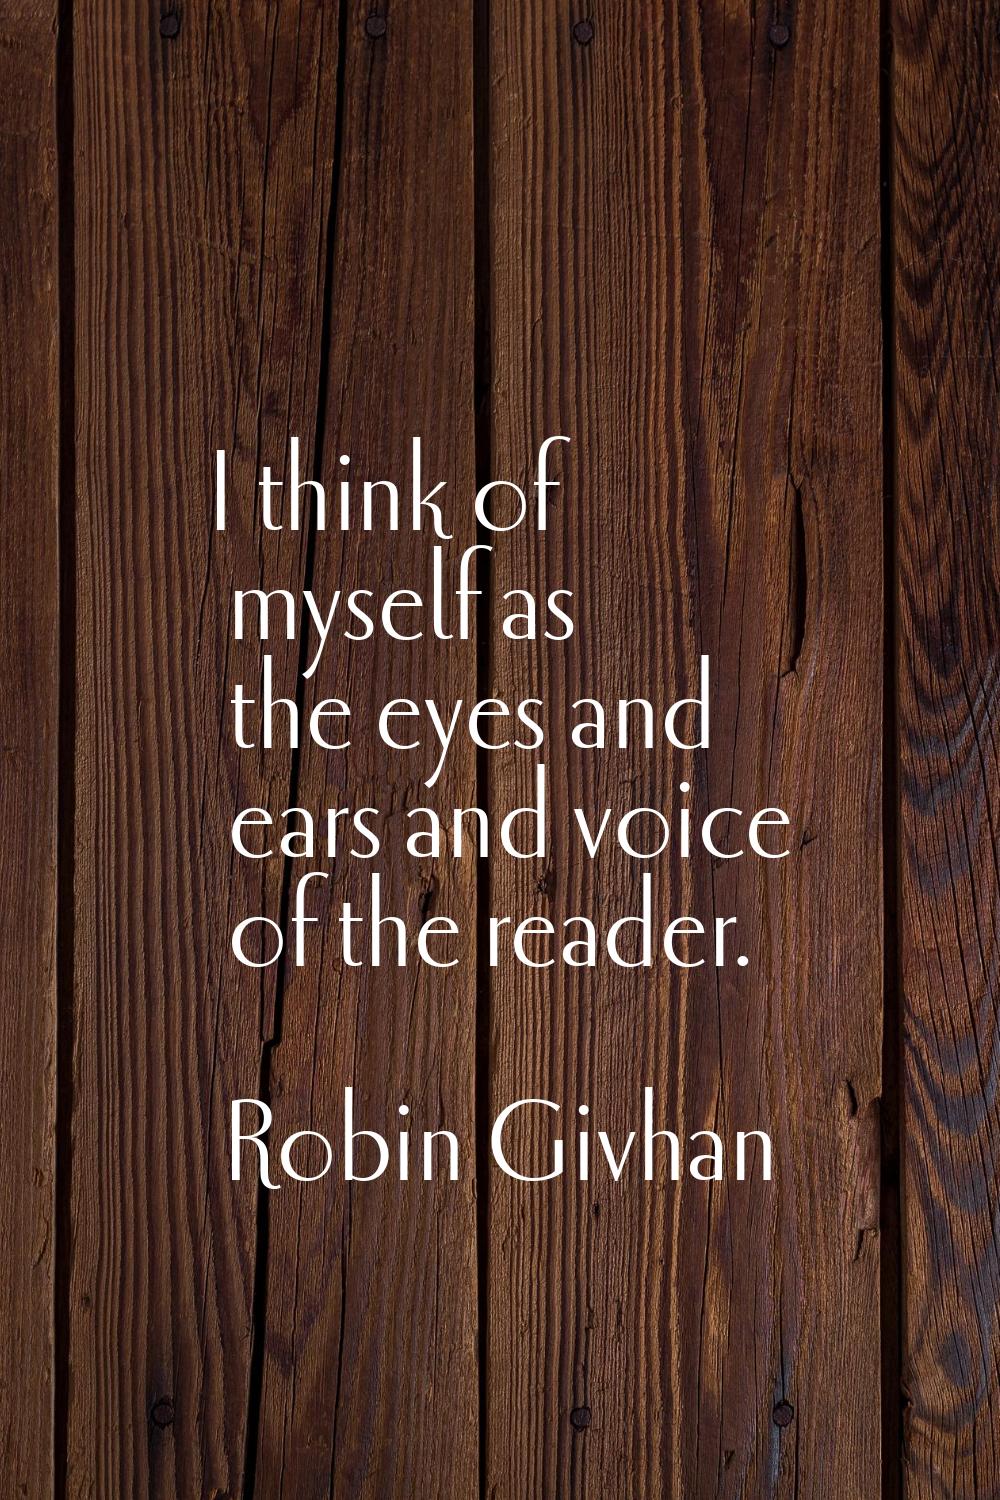 I think of myself as the eyes and ears and voice of the reader.